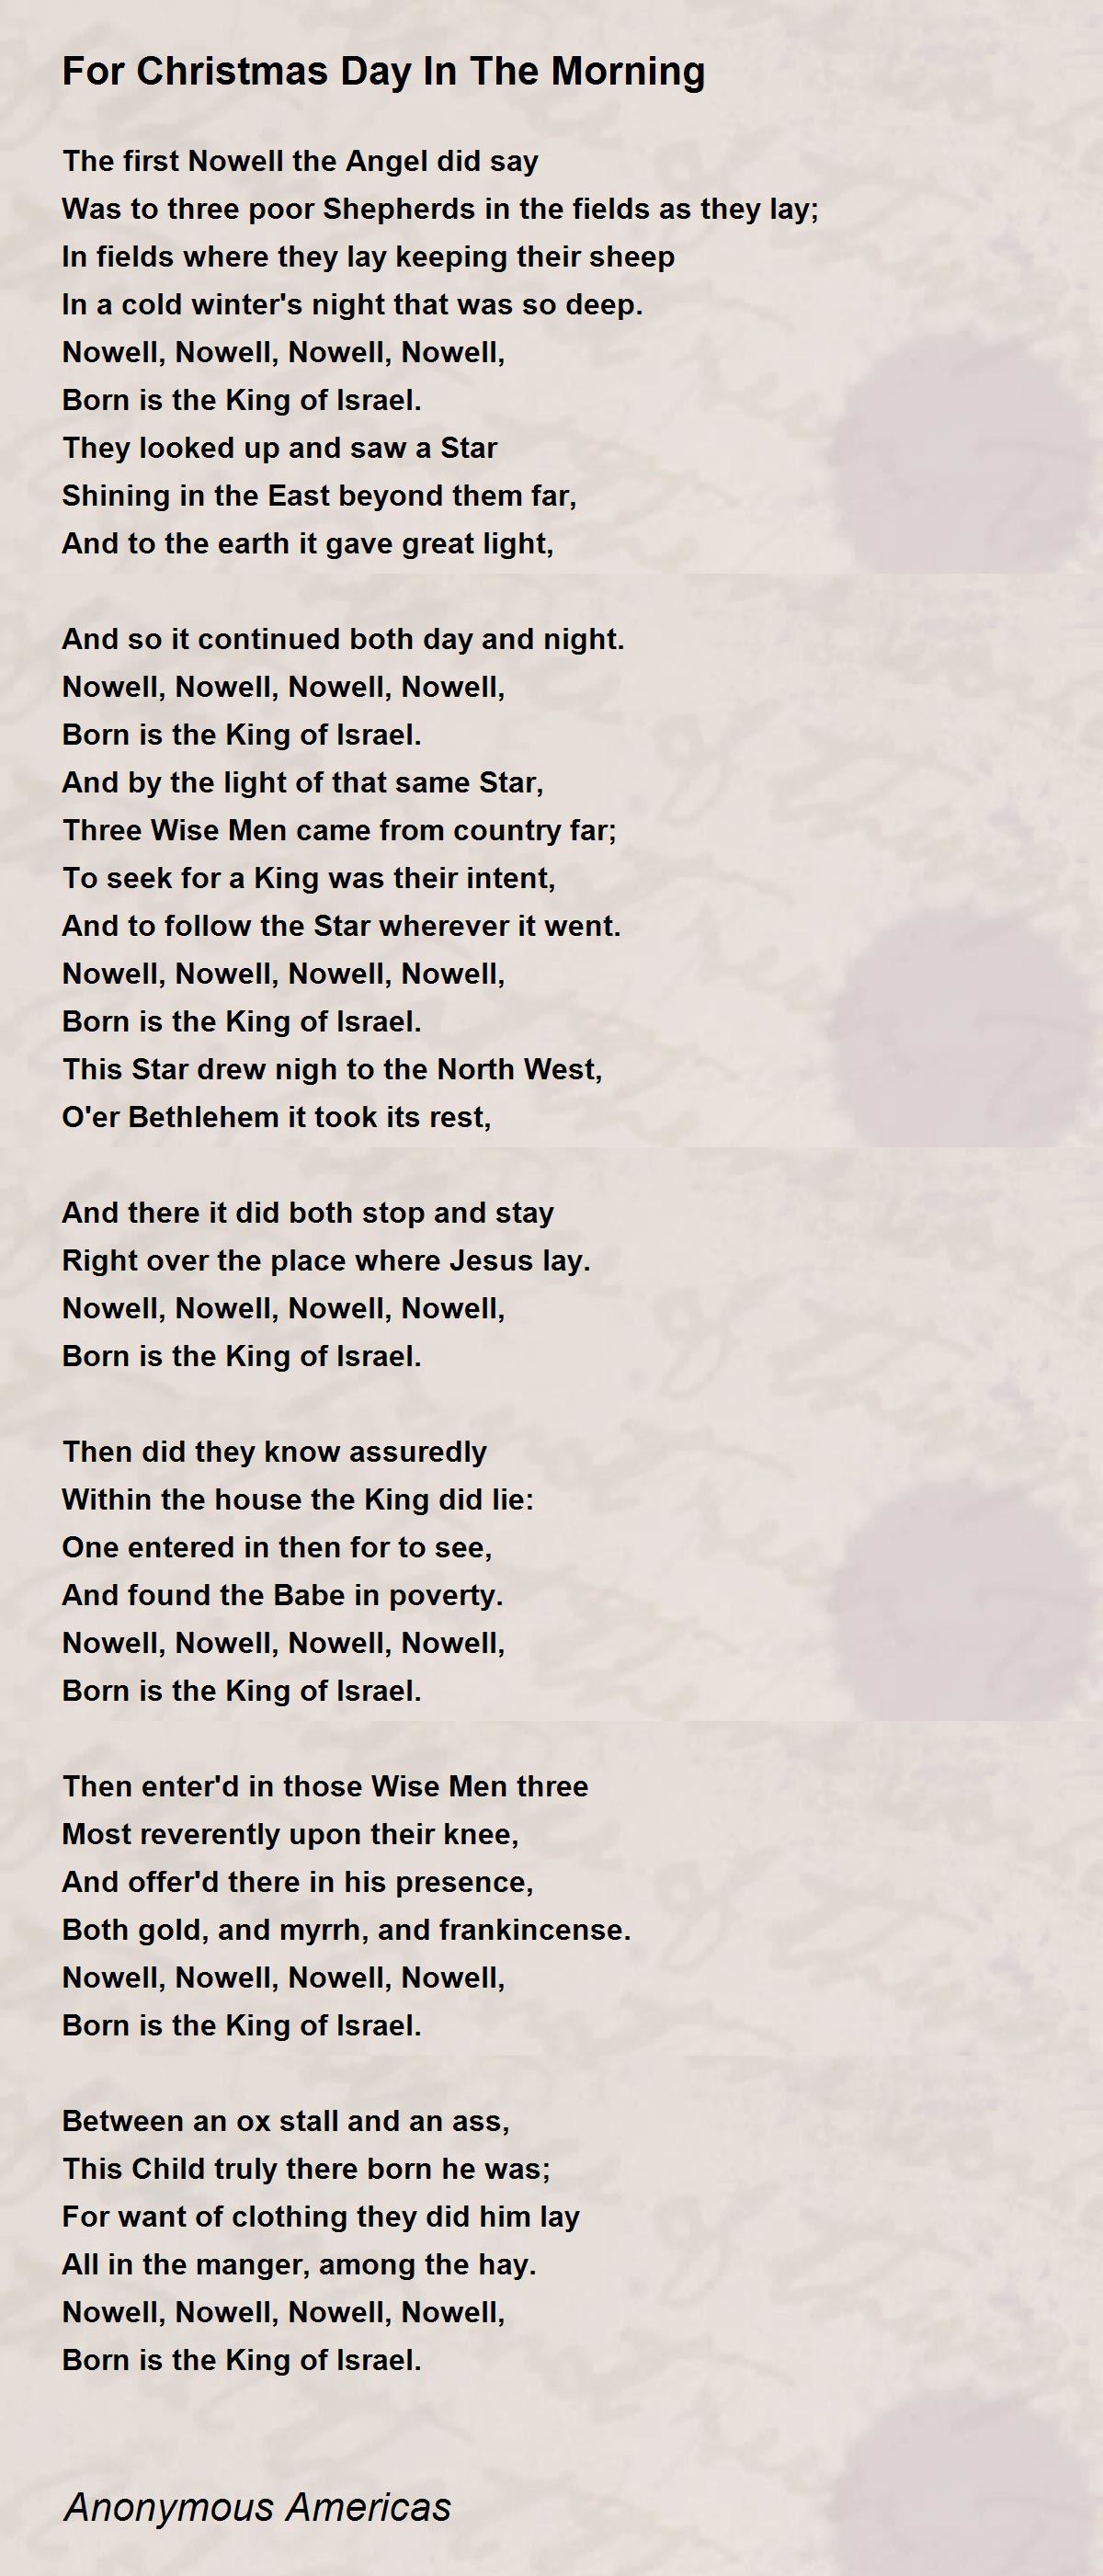 For Christmas Day In The Morning Poem by Anonymous Americas - Poem Hunter